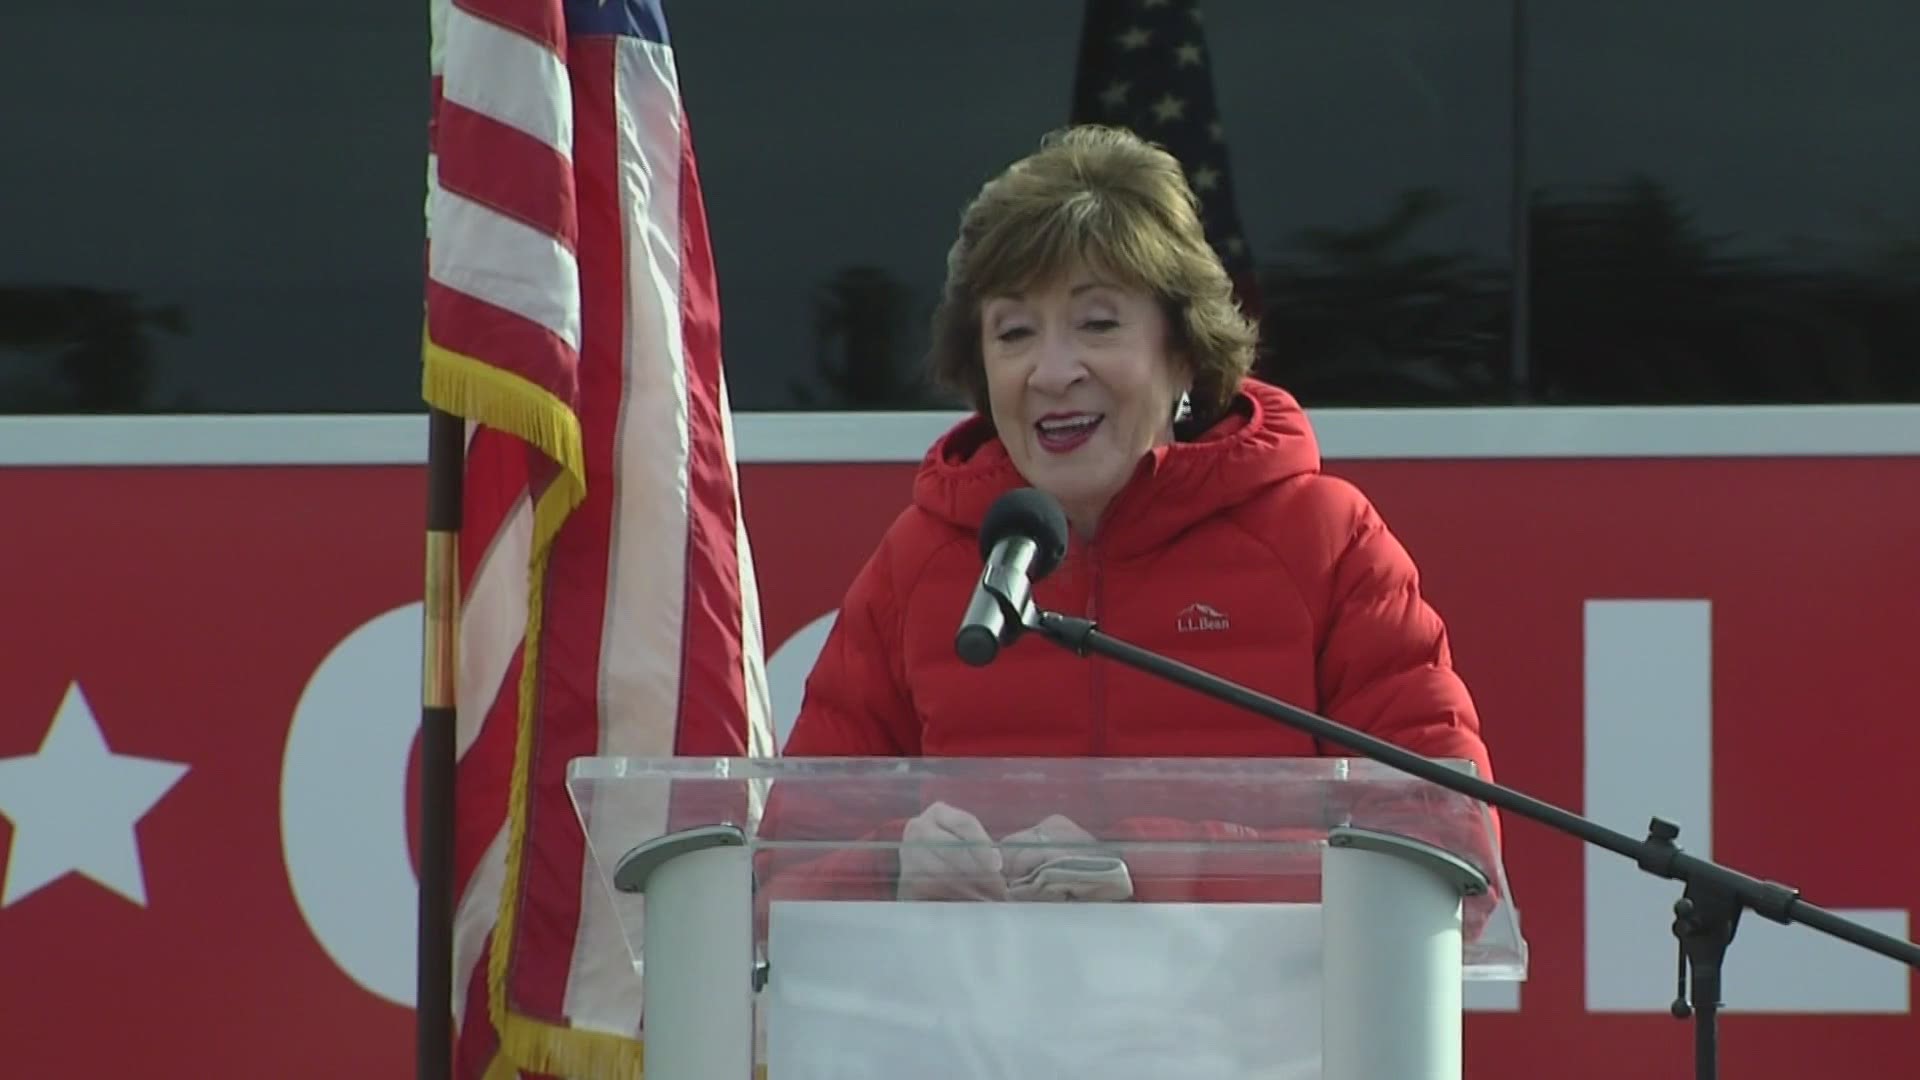 Republican Senator Susan Collins come out victorious, getting more than 50 percent of the vote.